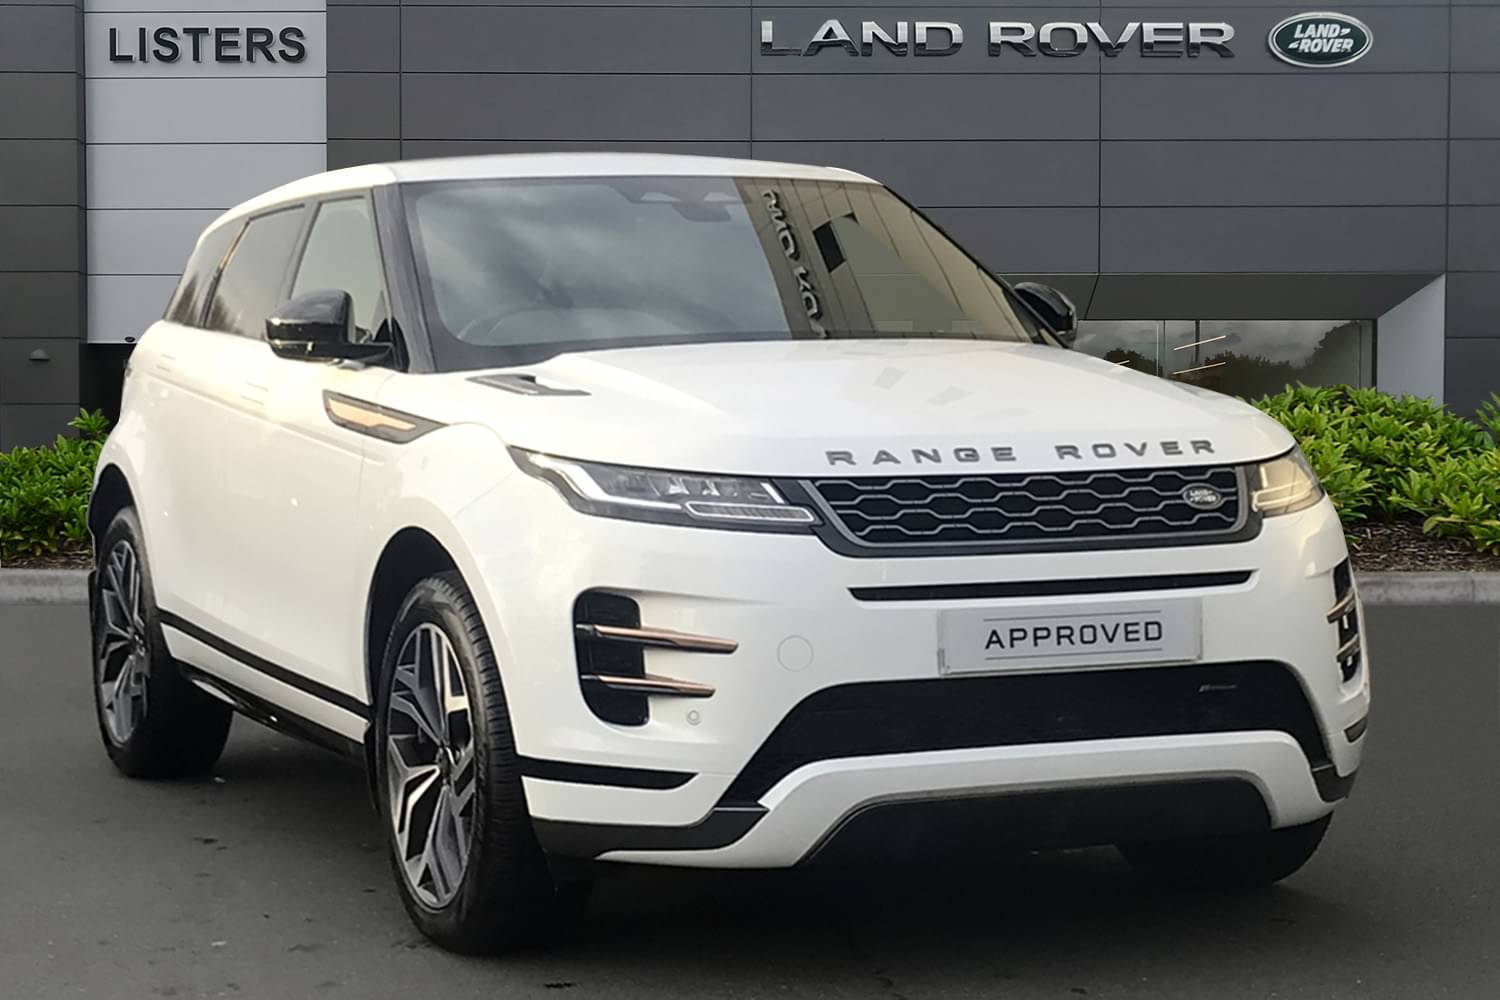 Used Range Rover Evoque Cars For Sale - Listers